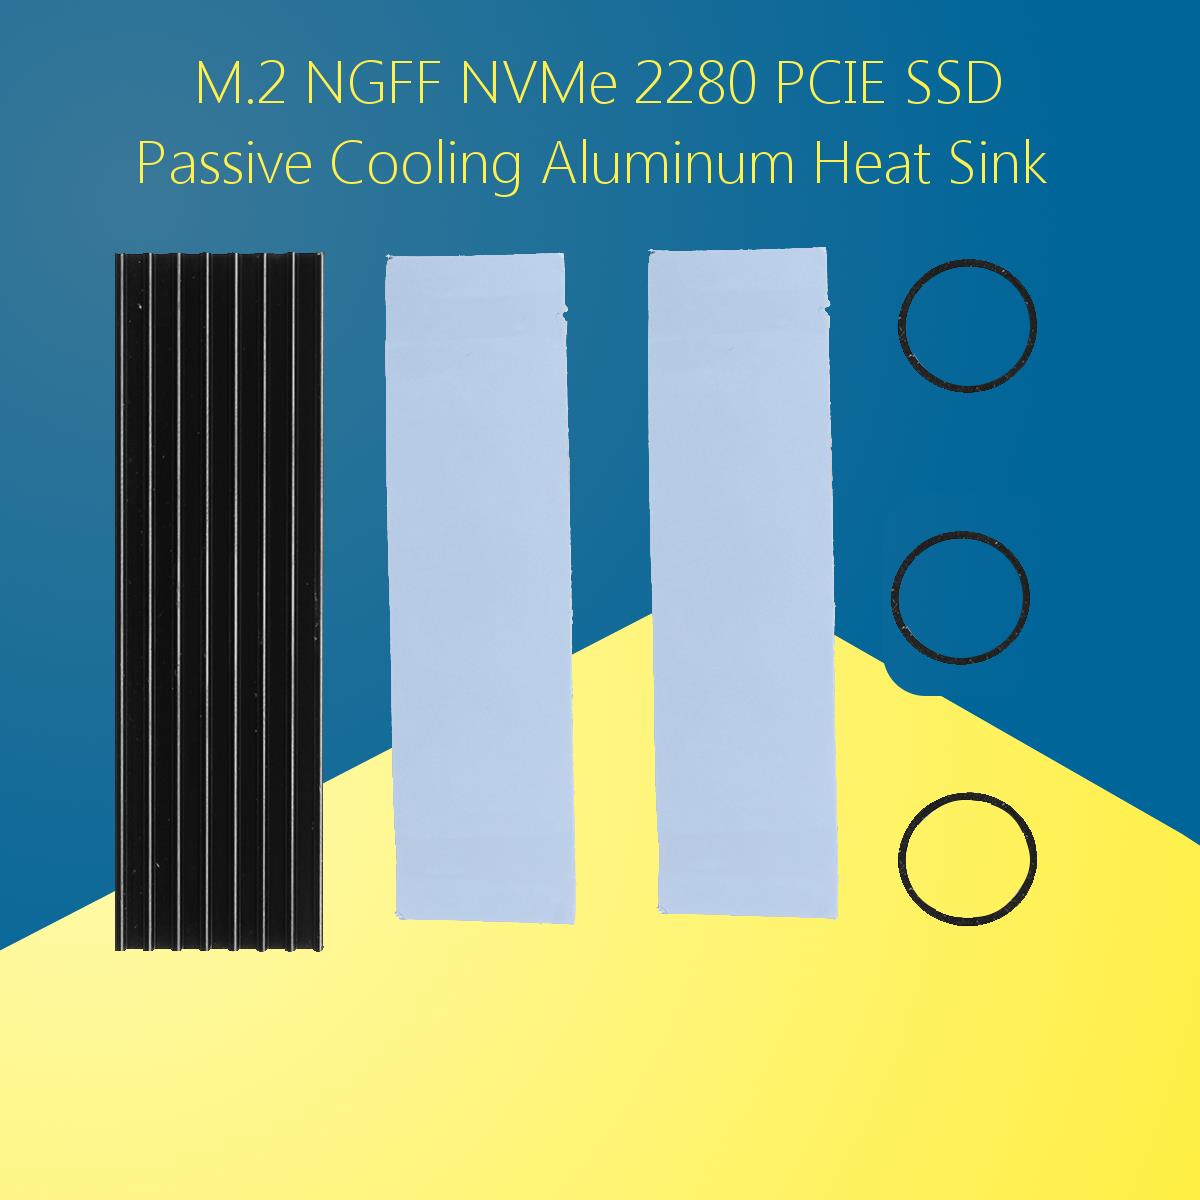 M2-NGFF-NVMe-2280-PCIE-SSD-Passive-Cooling-Aluminum-Fins-Heat-Sink-Thermal-Pad-1199957